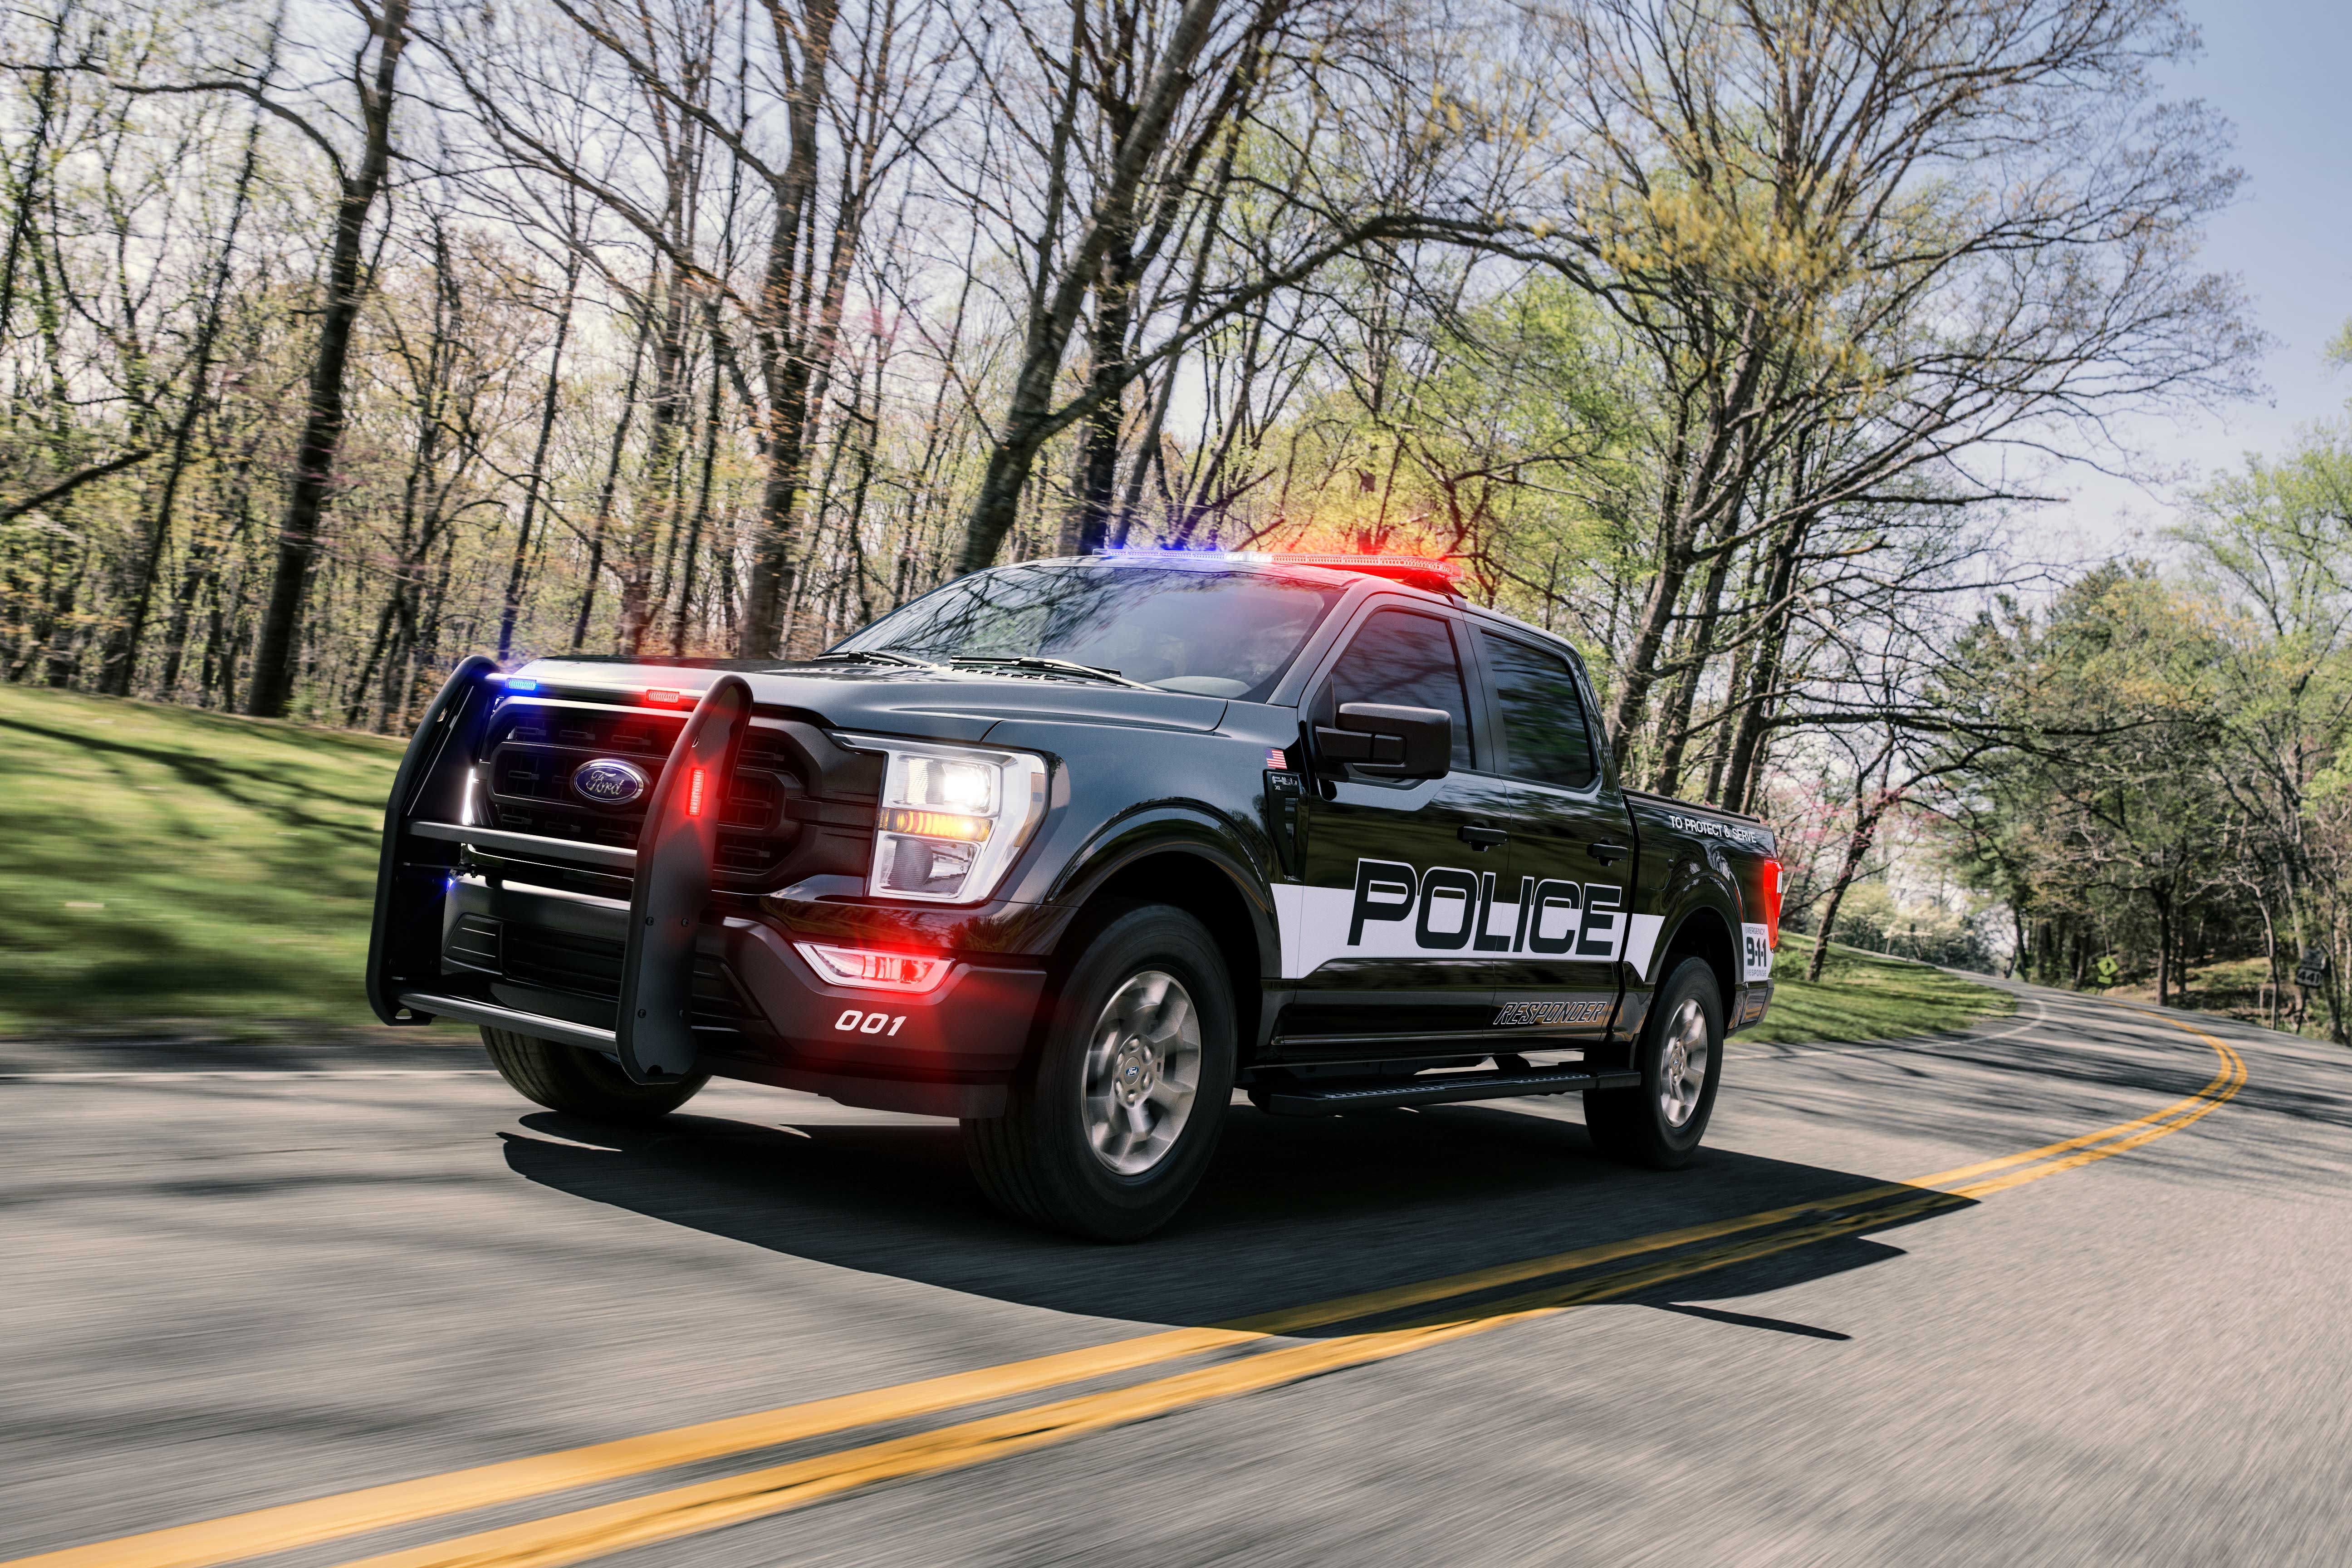 Meet Ford’s new pursuit F-150 pickup for police